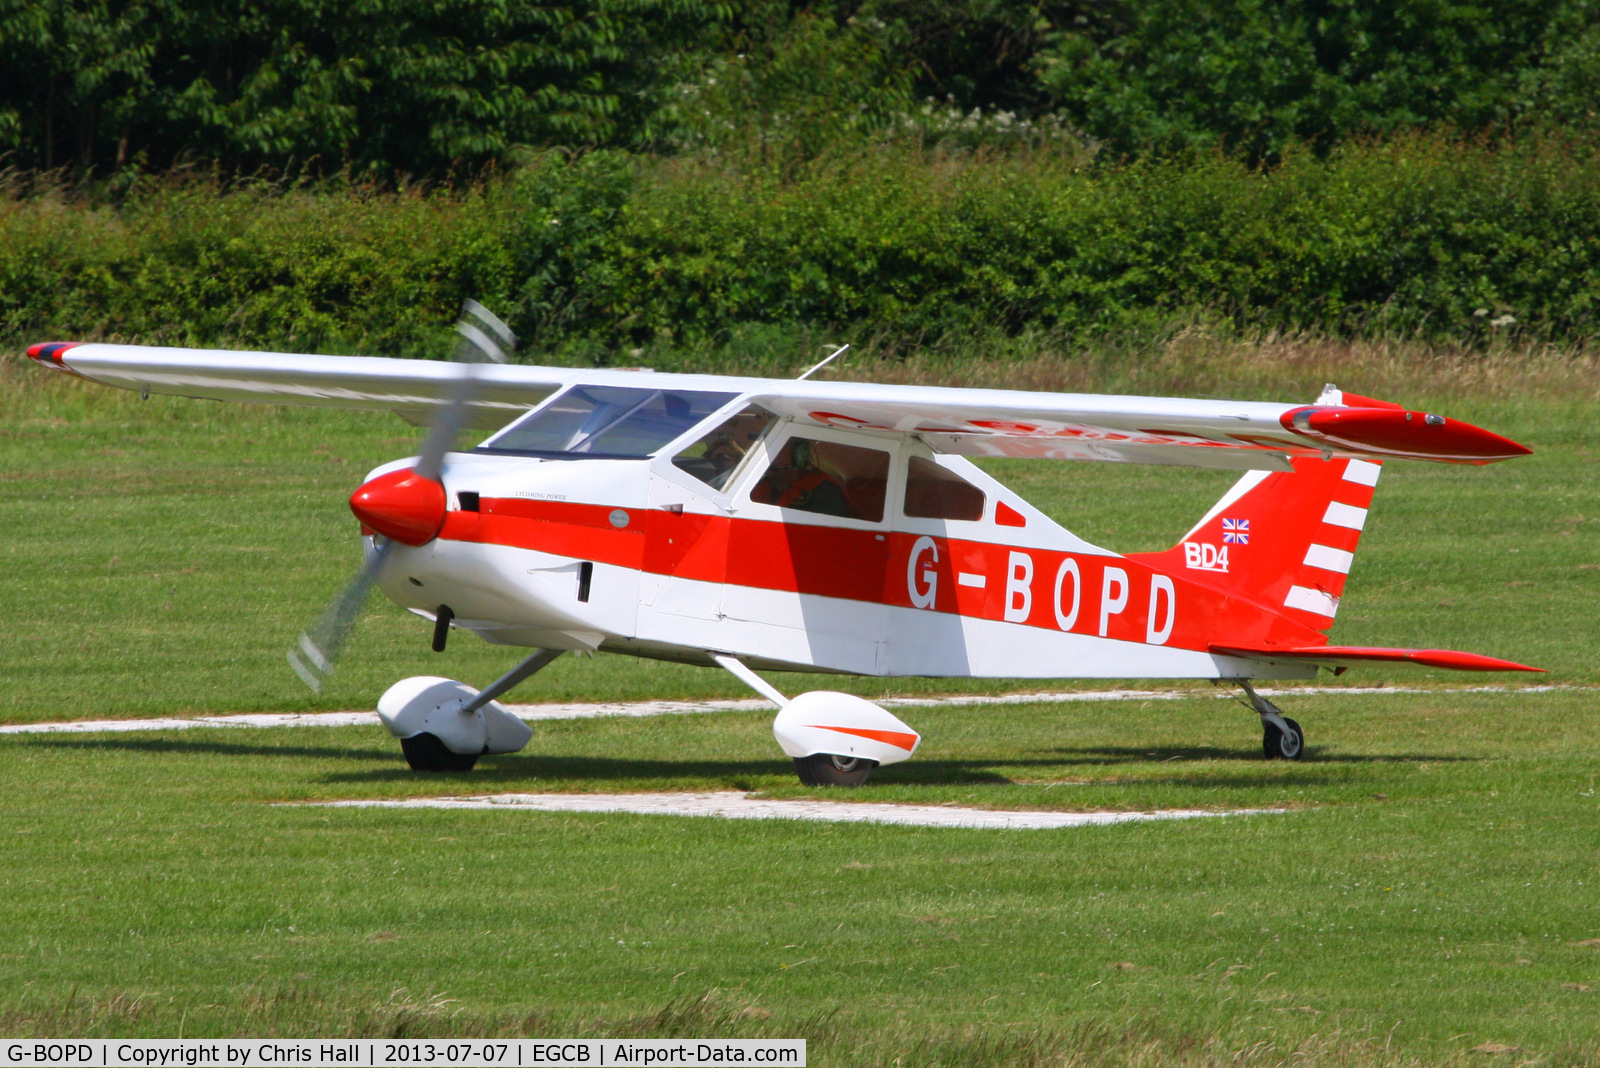 G-BOPD, 1974 Bede BD-4 C/N 632, at the Barton open day and fly in